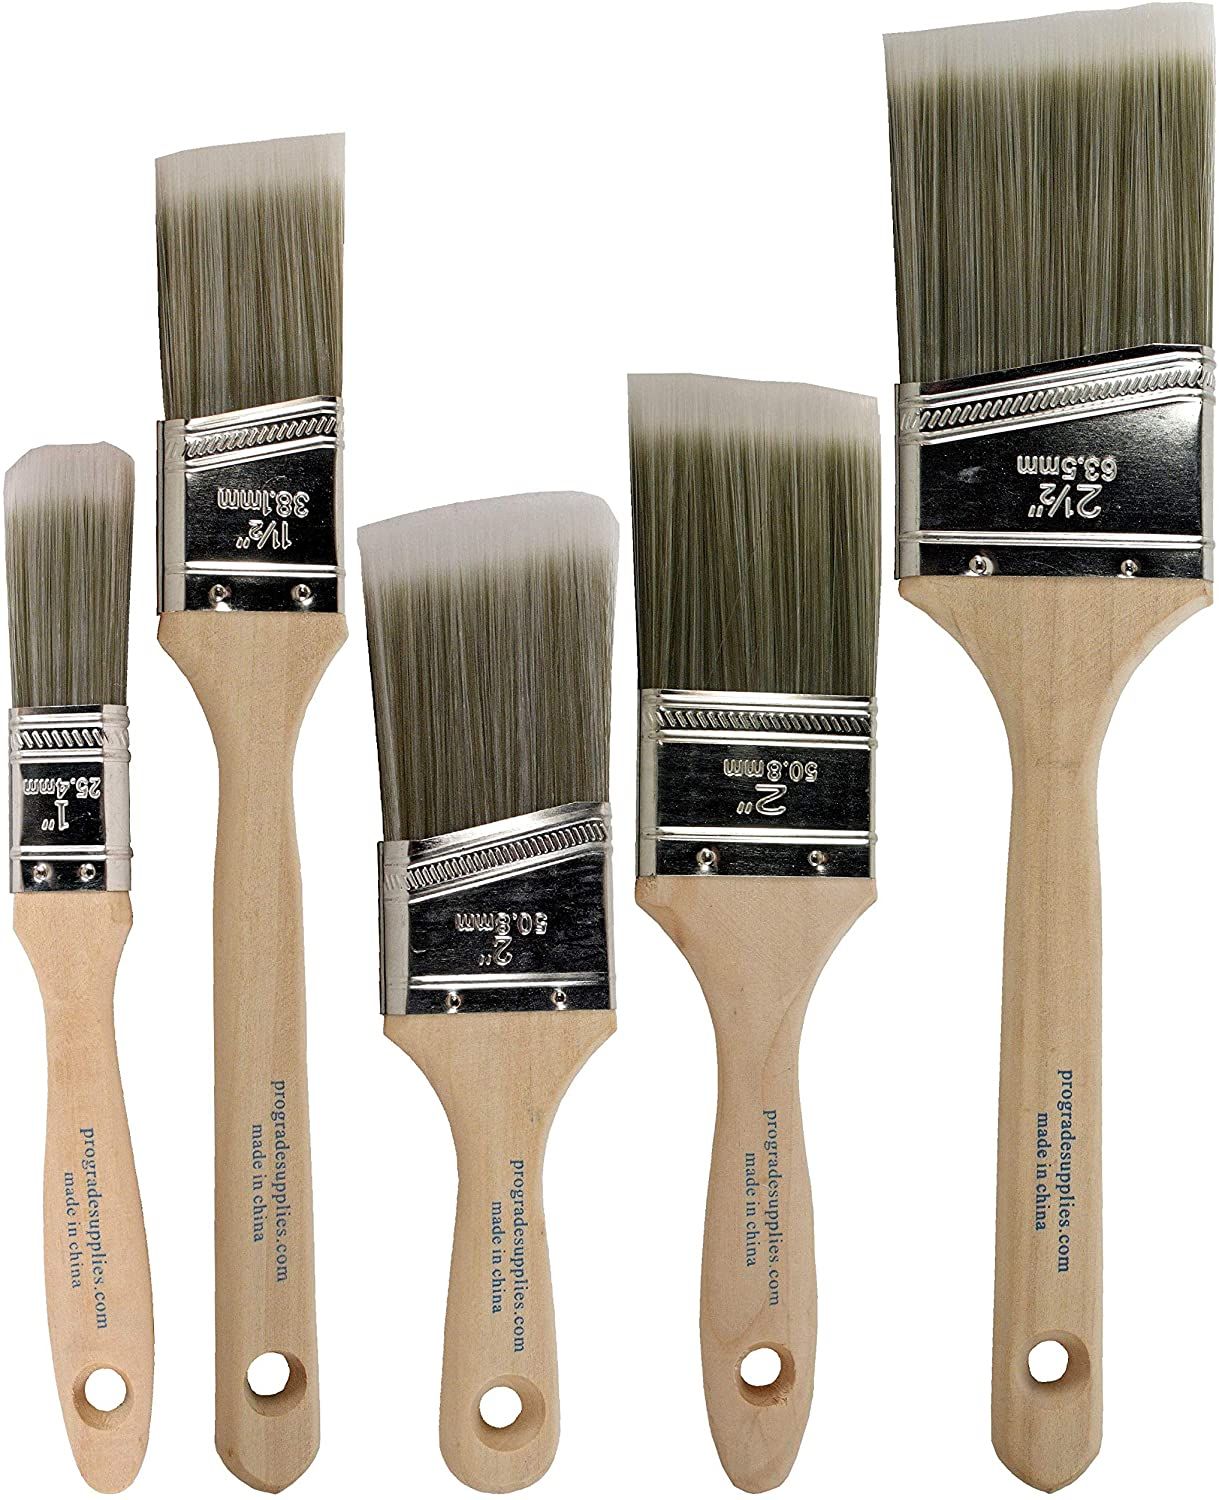 Cutting In Paint Brushes: The Best Ones to Buy